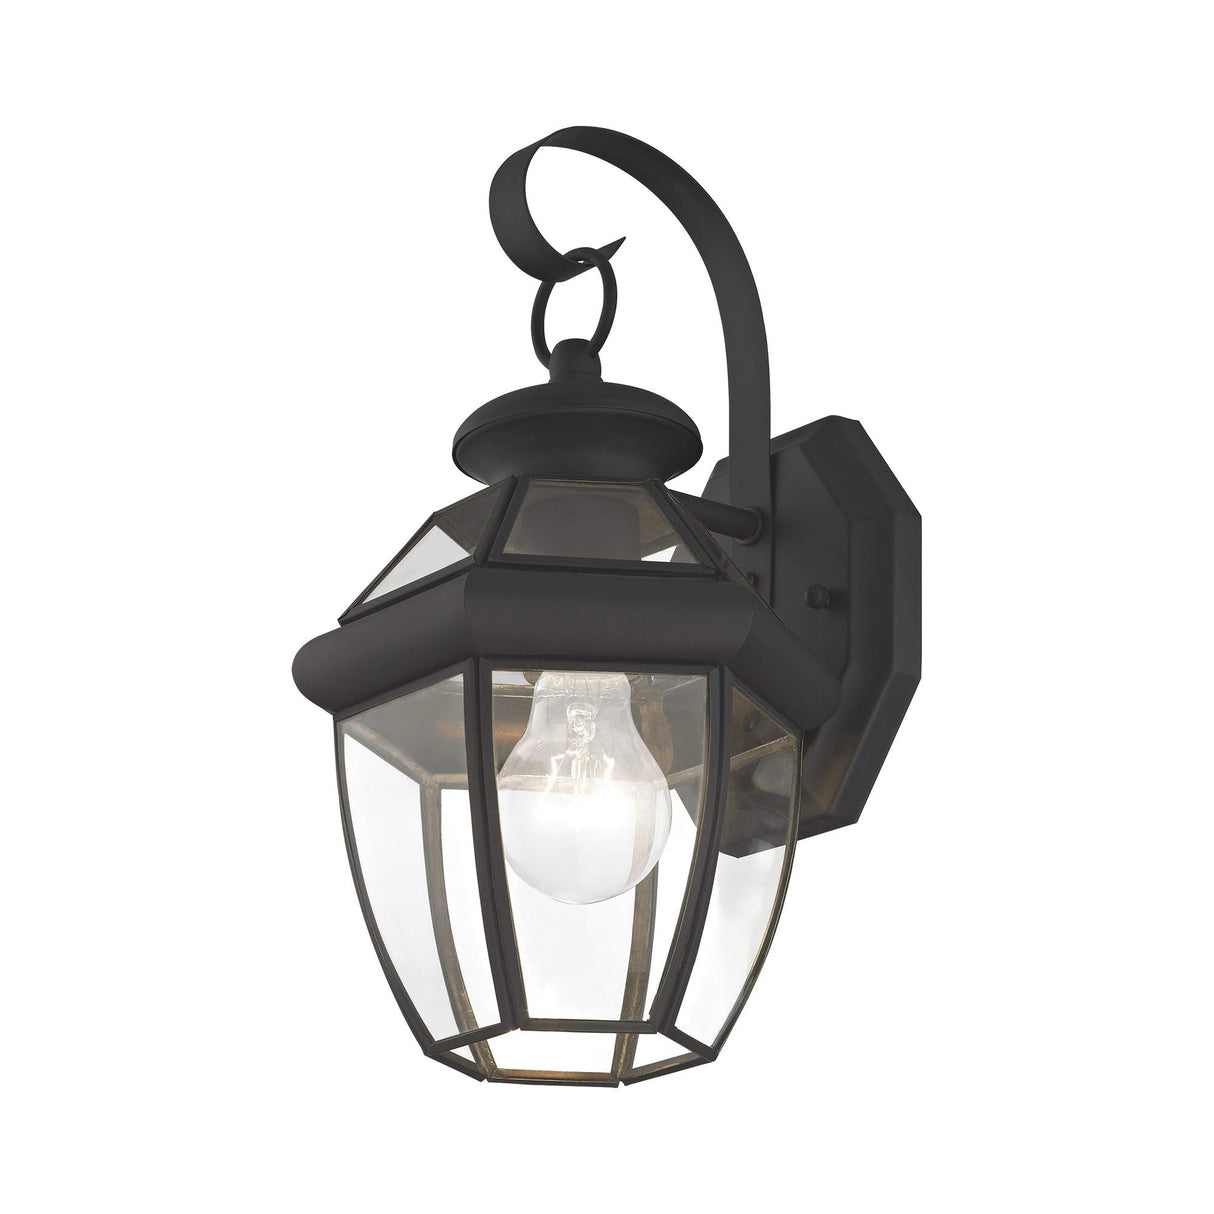 Livex Lighting 2051-04 Monterey 1 Light Outdoor Black Finish Solid Brass Wall Lantern with Clear Beveled Glass